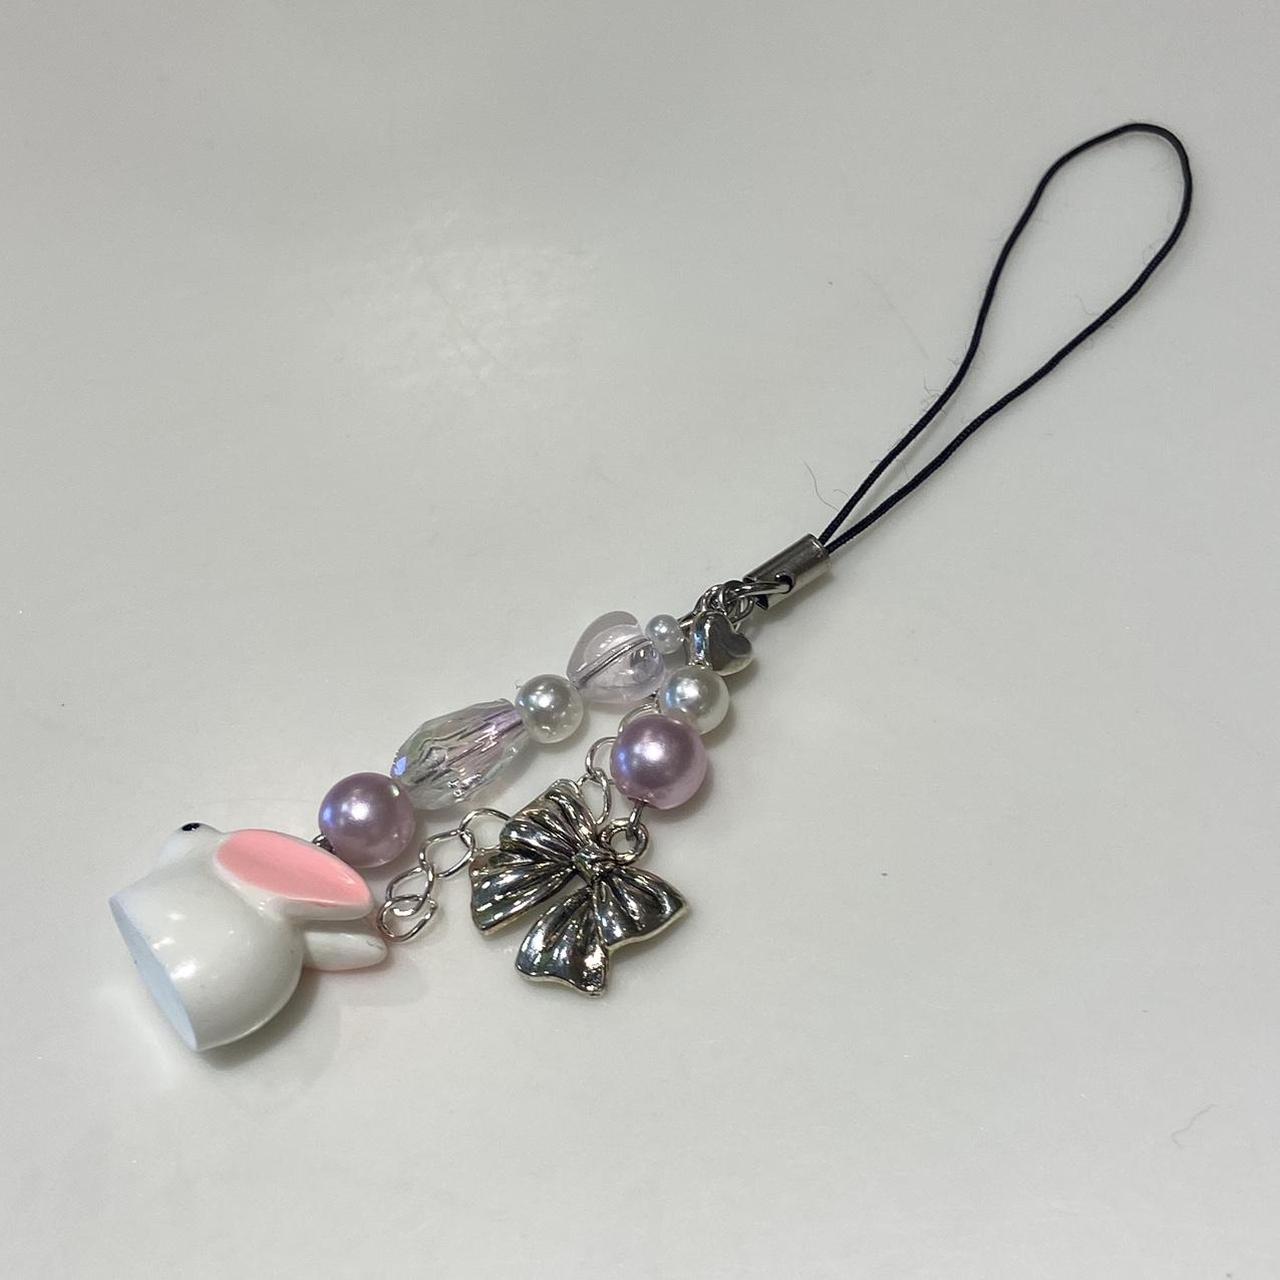 bunny phone charm ☆ pink pearl beads and heart... - Depop